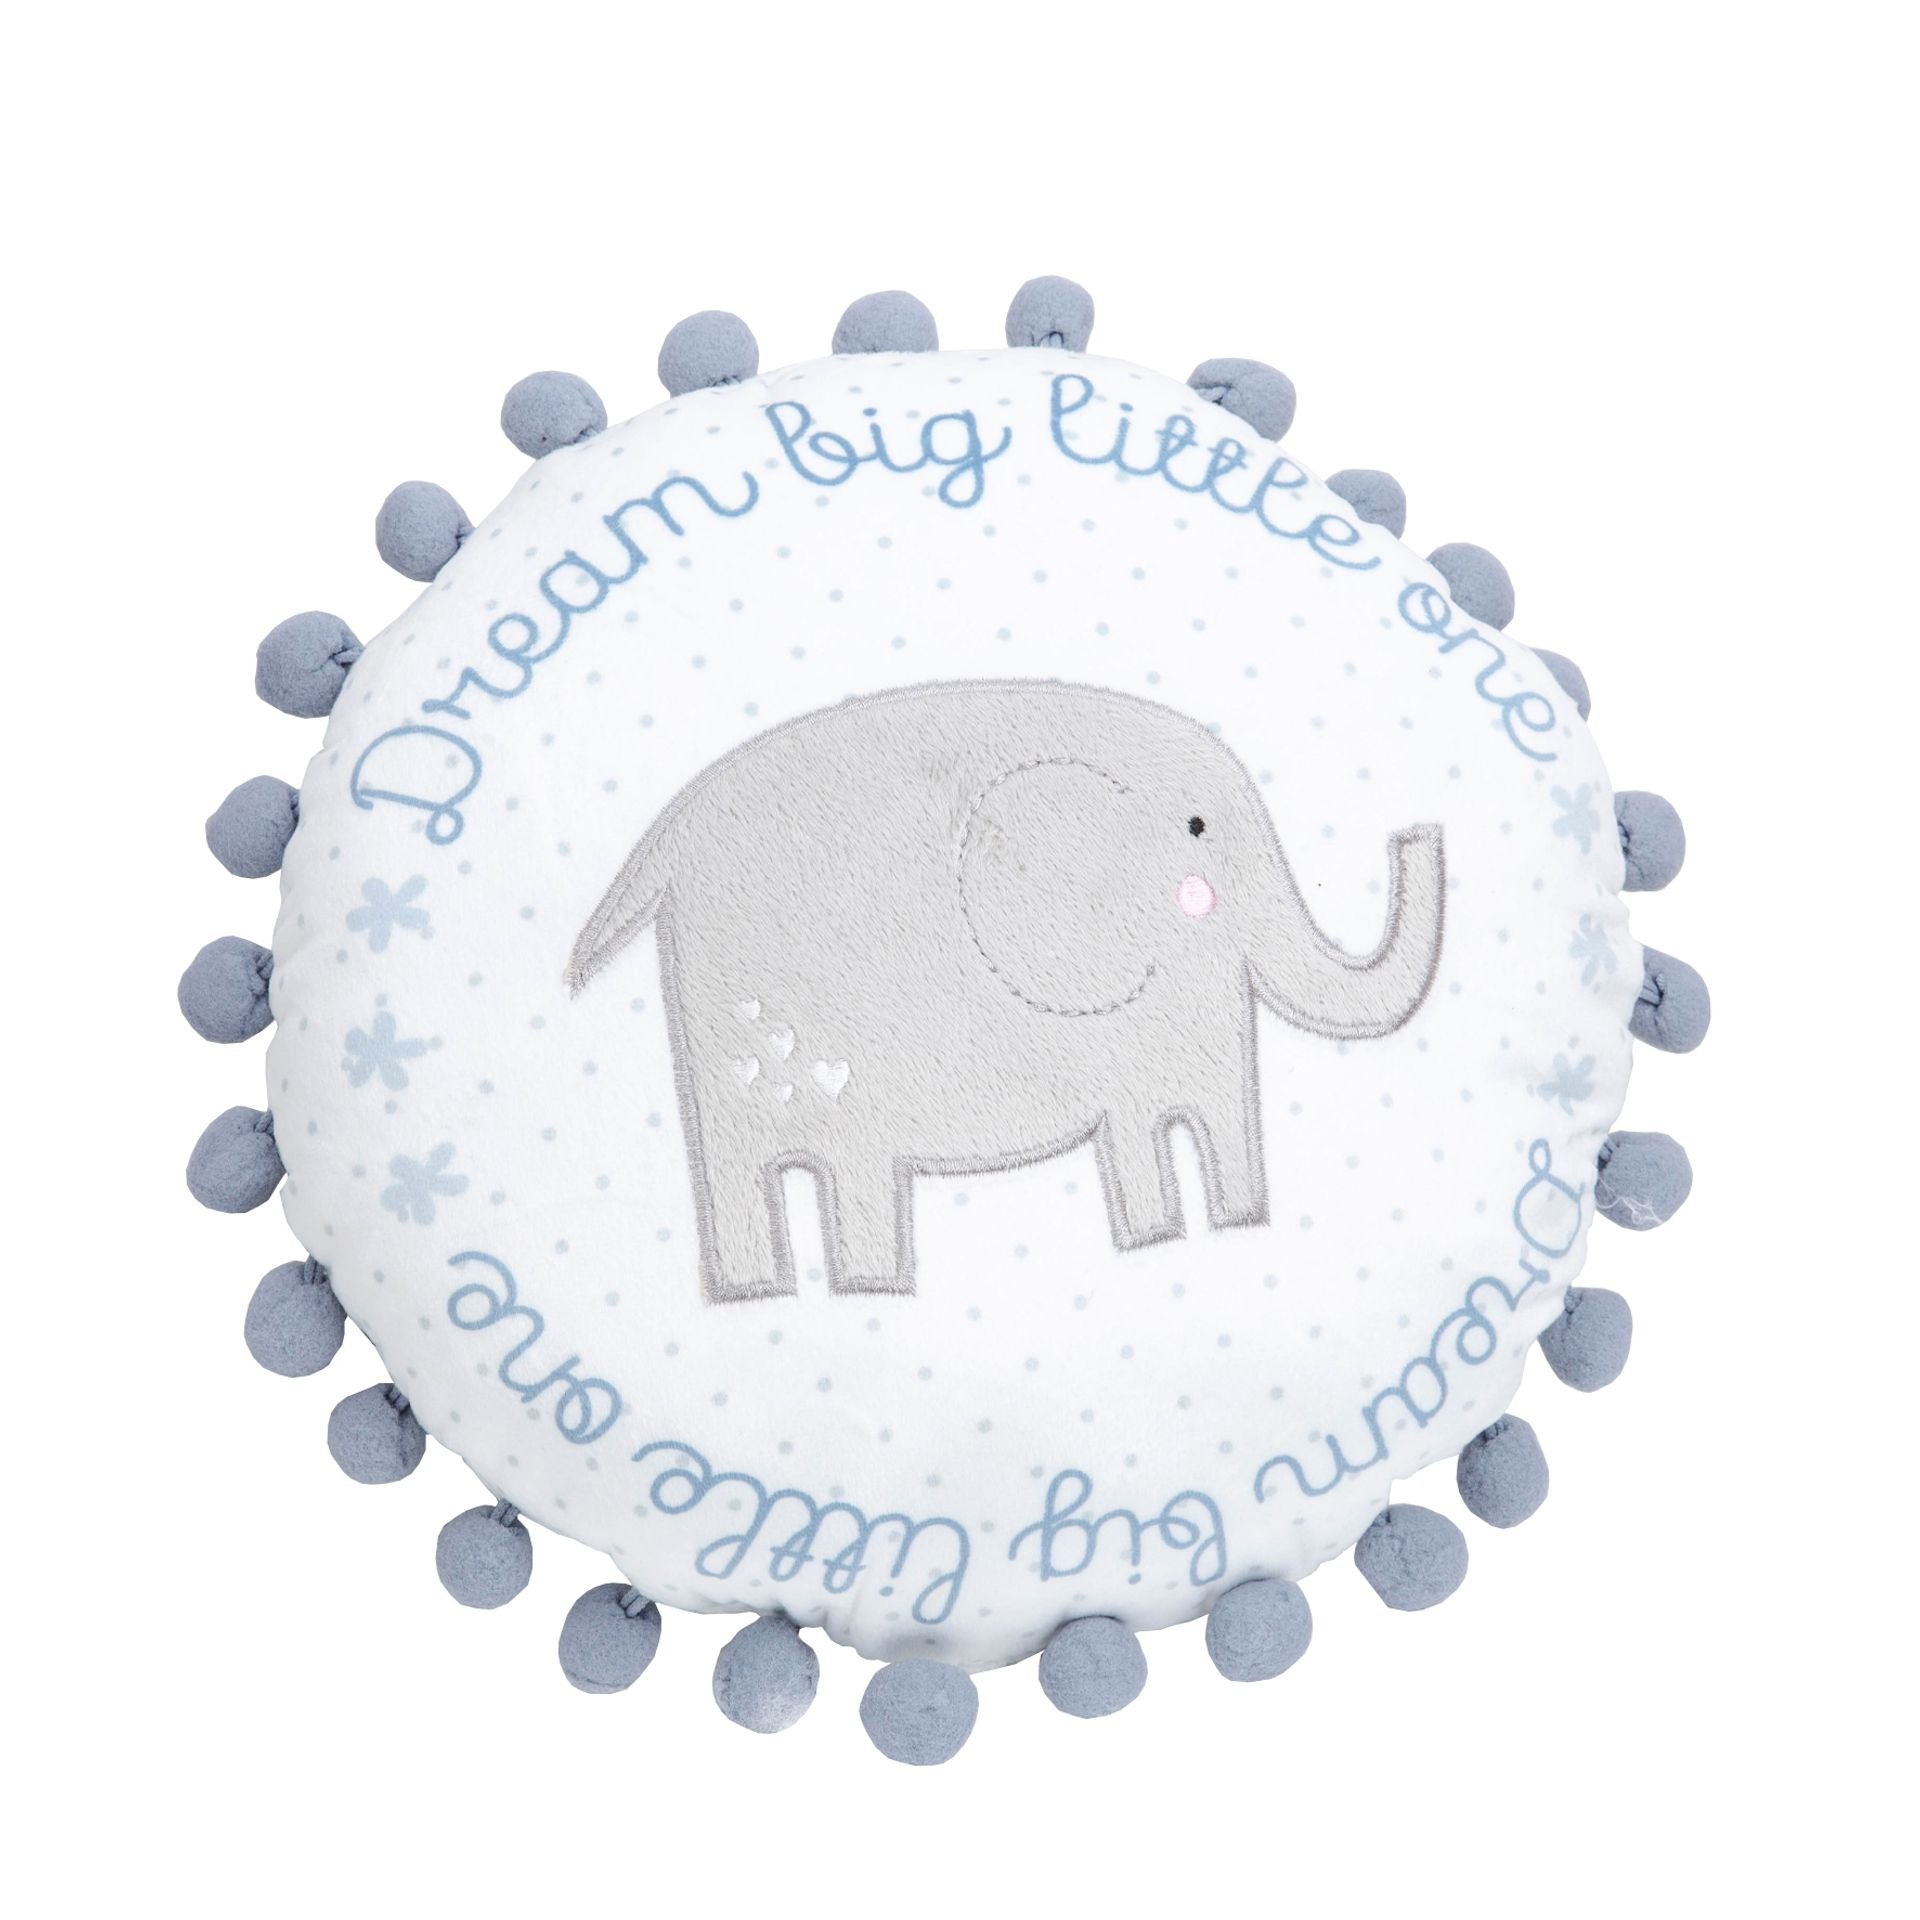 This super soft 30cm fabric cushion features a cute grey elephant design with blue border lettering and blue bobbly trim around the edge. The perfect comforting accessory for a little prince&#39;s room. Wipe clean only.